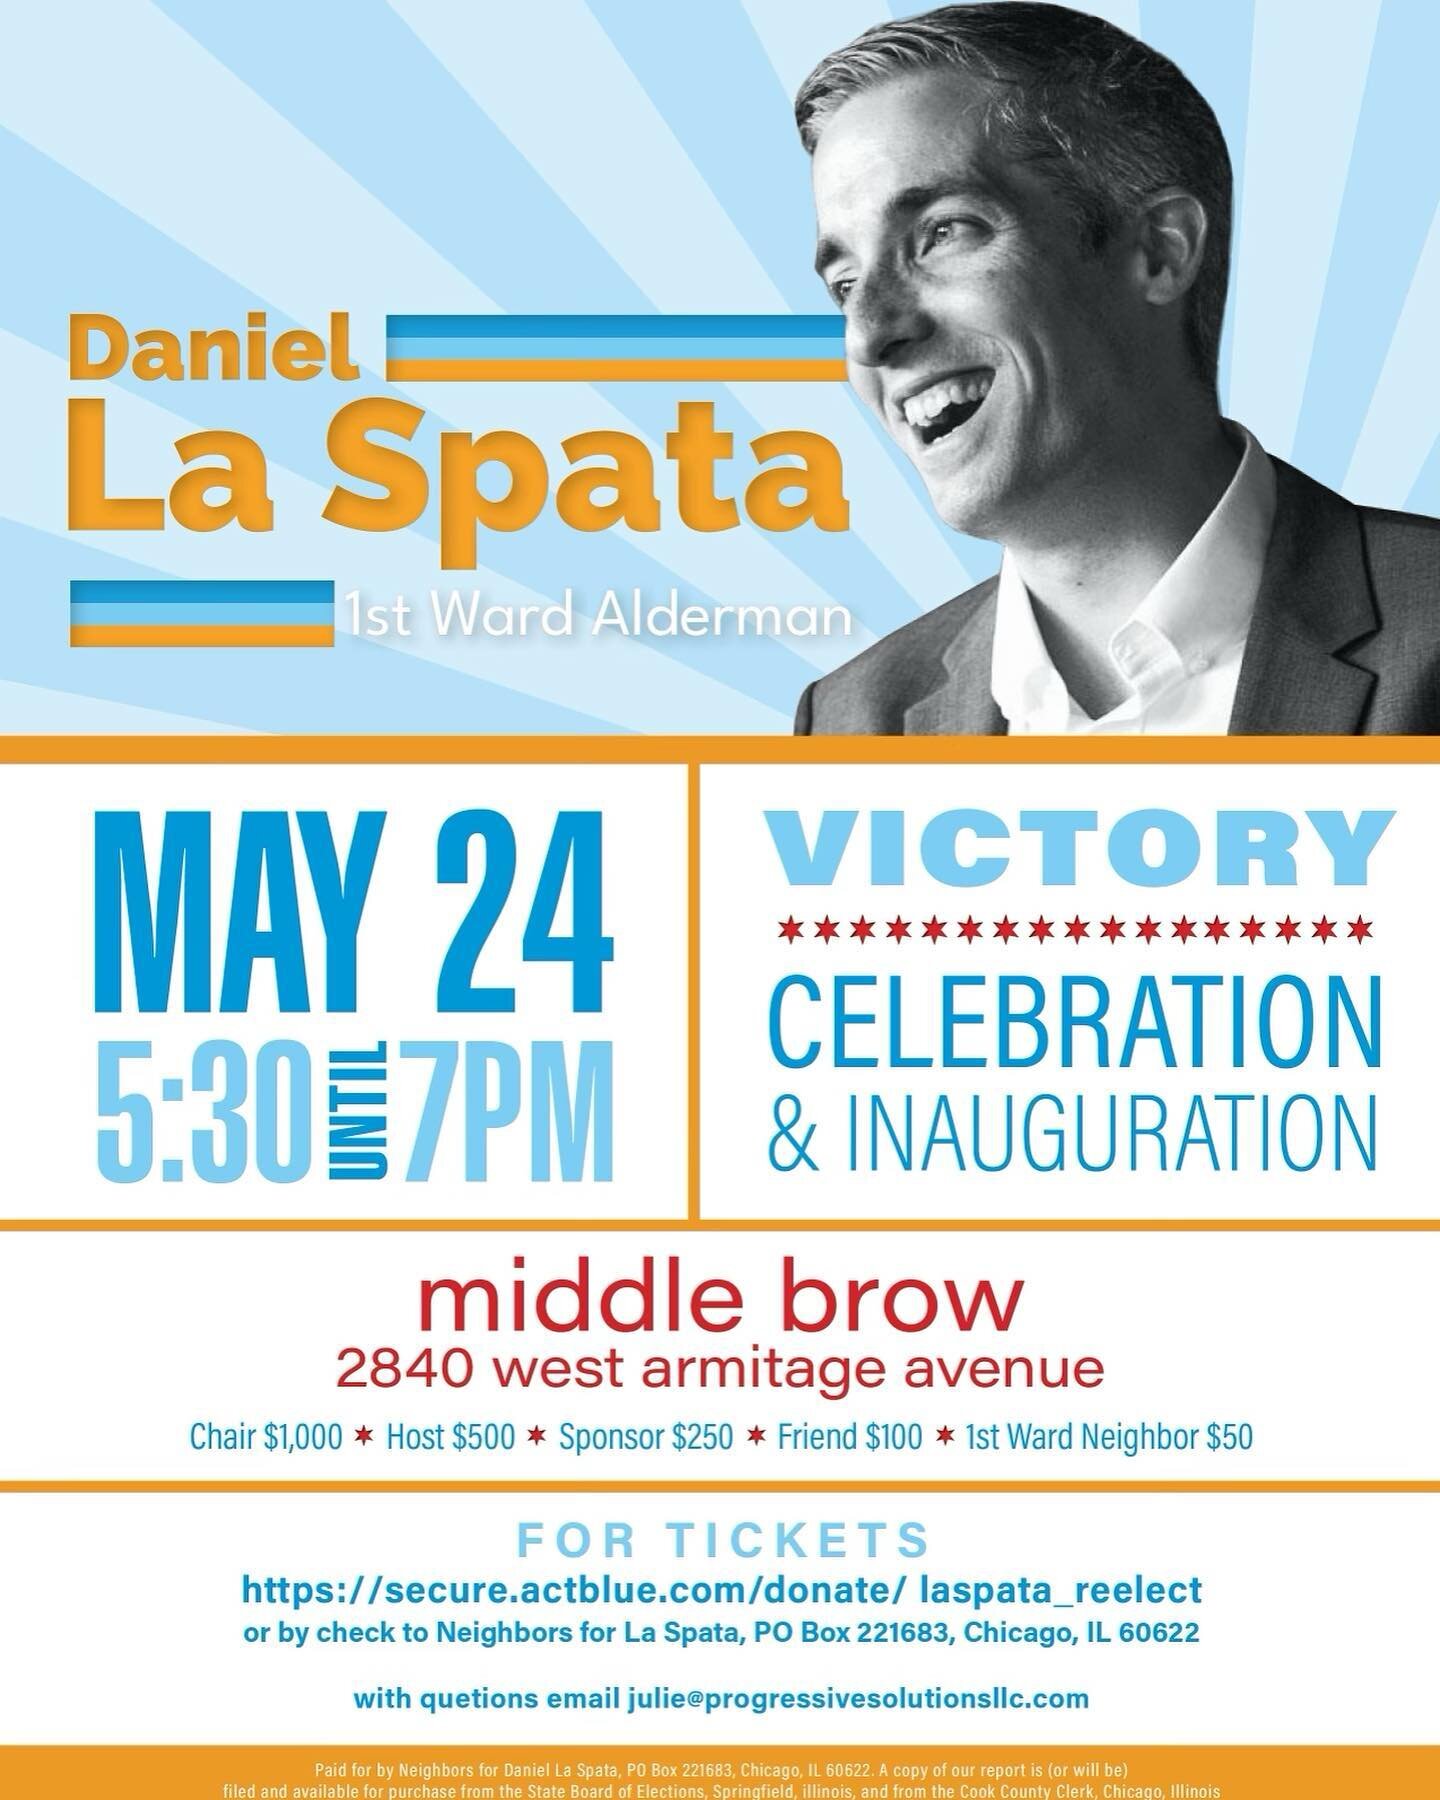 Can&rsquo;t wait to celebrate with you a week from now! There&rsquo;s a bold new future coming to Chicago and we&rsquo;re going to build it together! Tickets available here: https://secure.actblue.com/donate/laspata_reelect